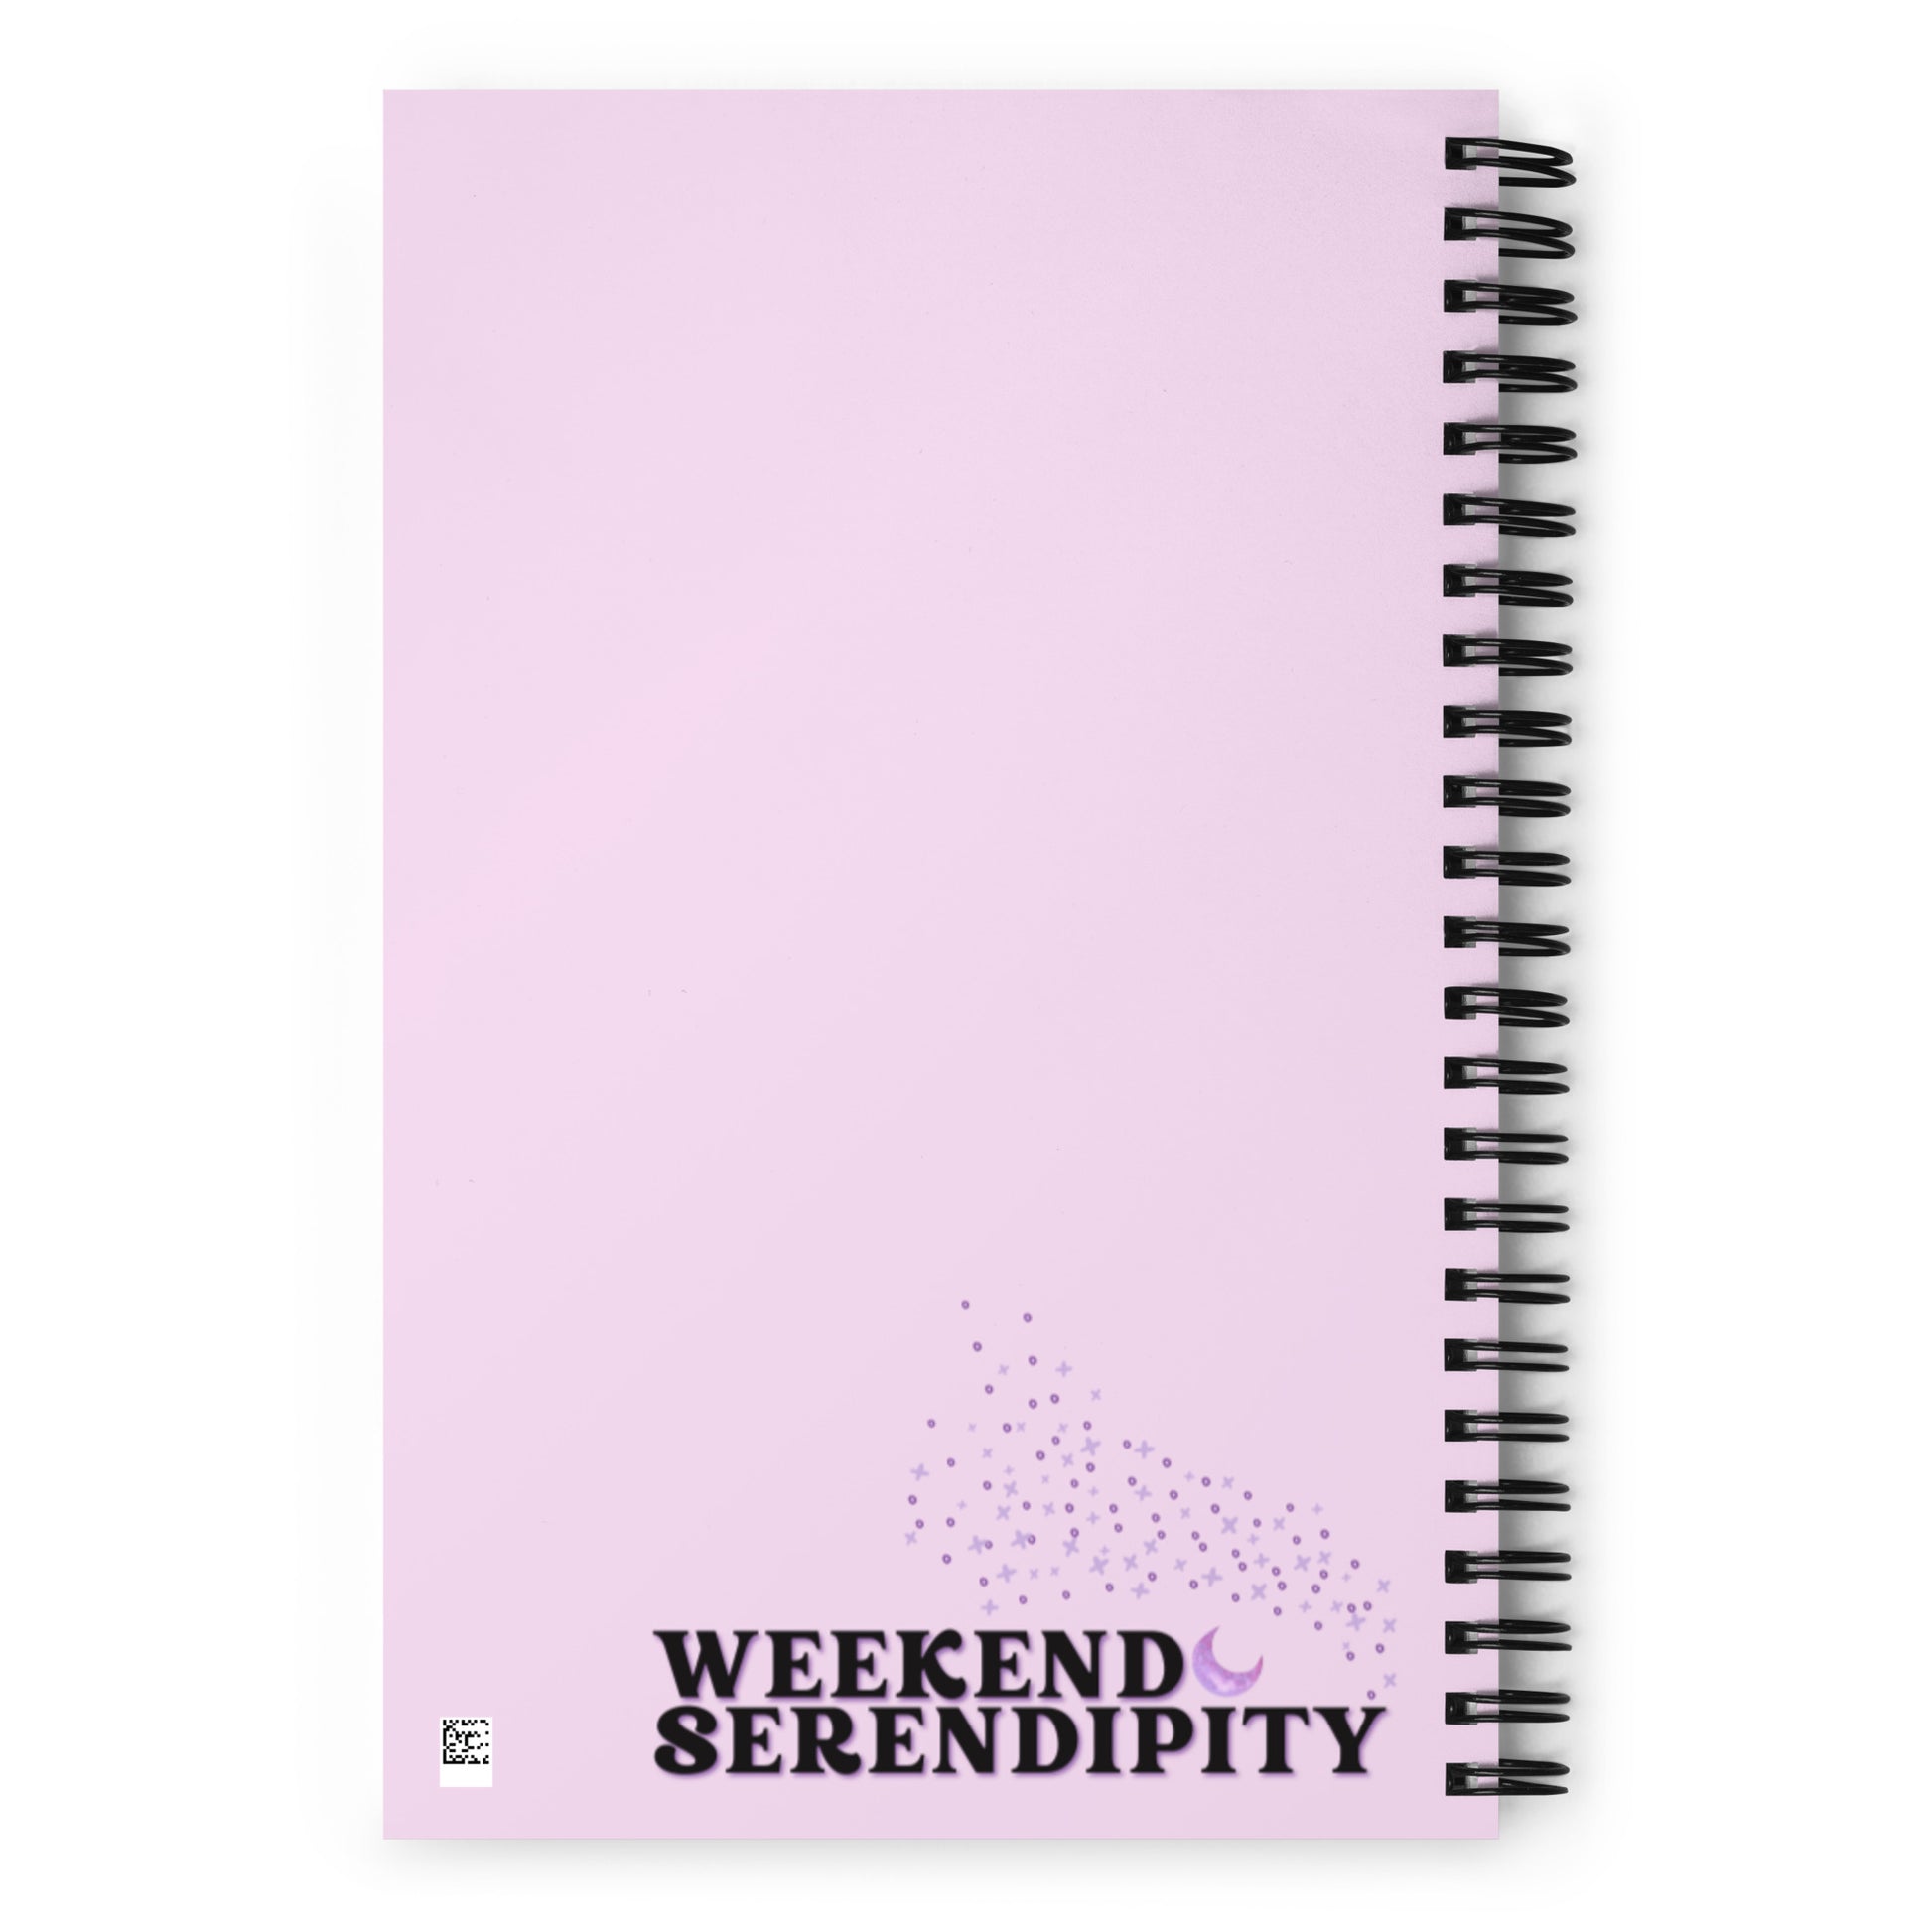 back side of a spiral bound notebook with the Weekend Serendipity logo